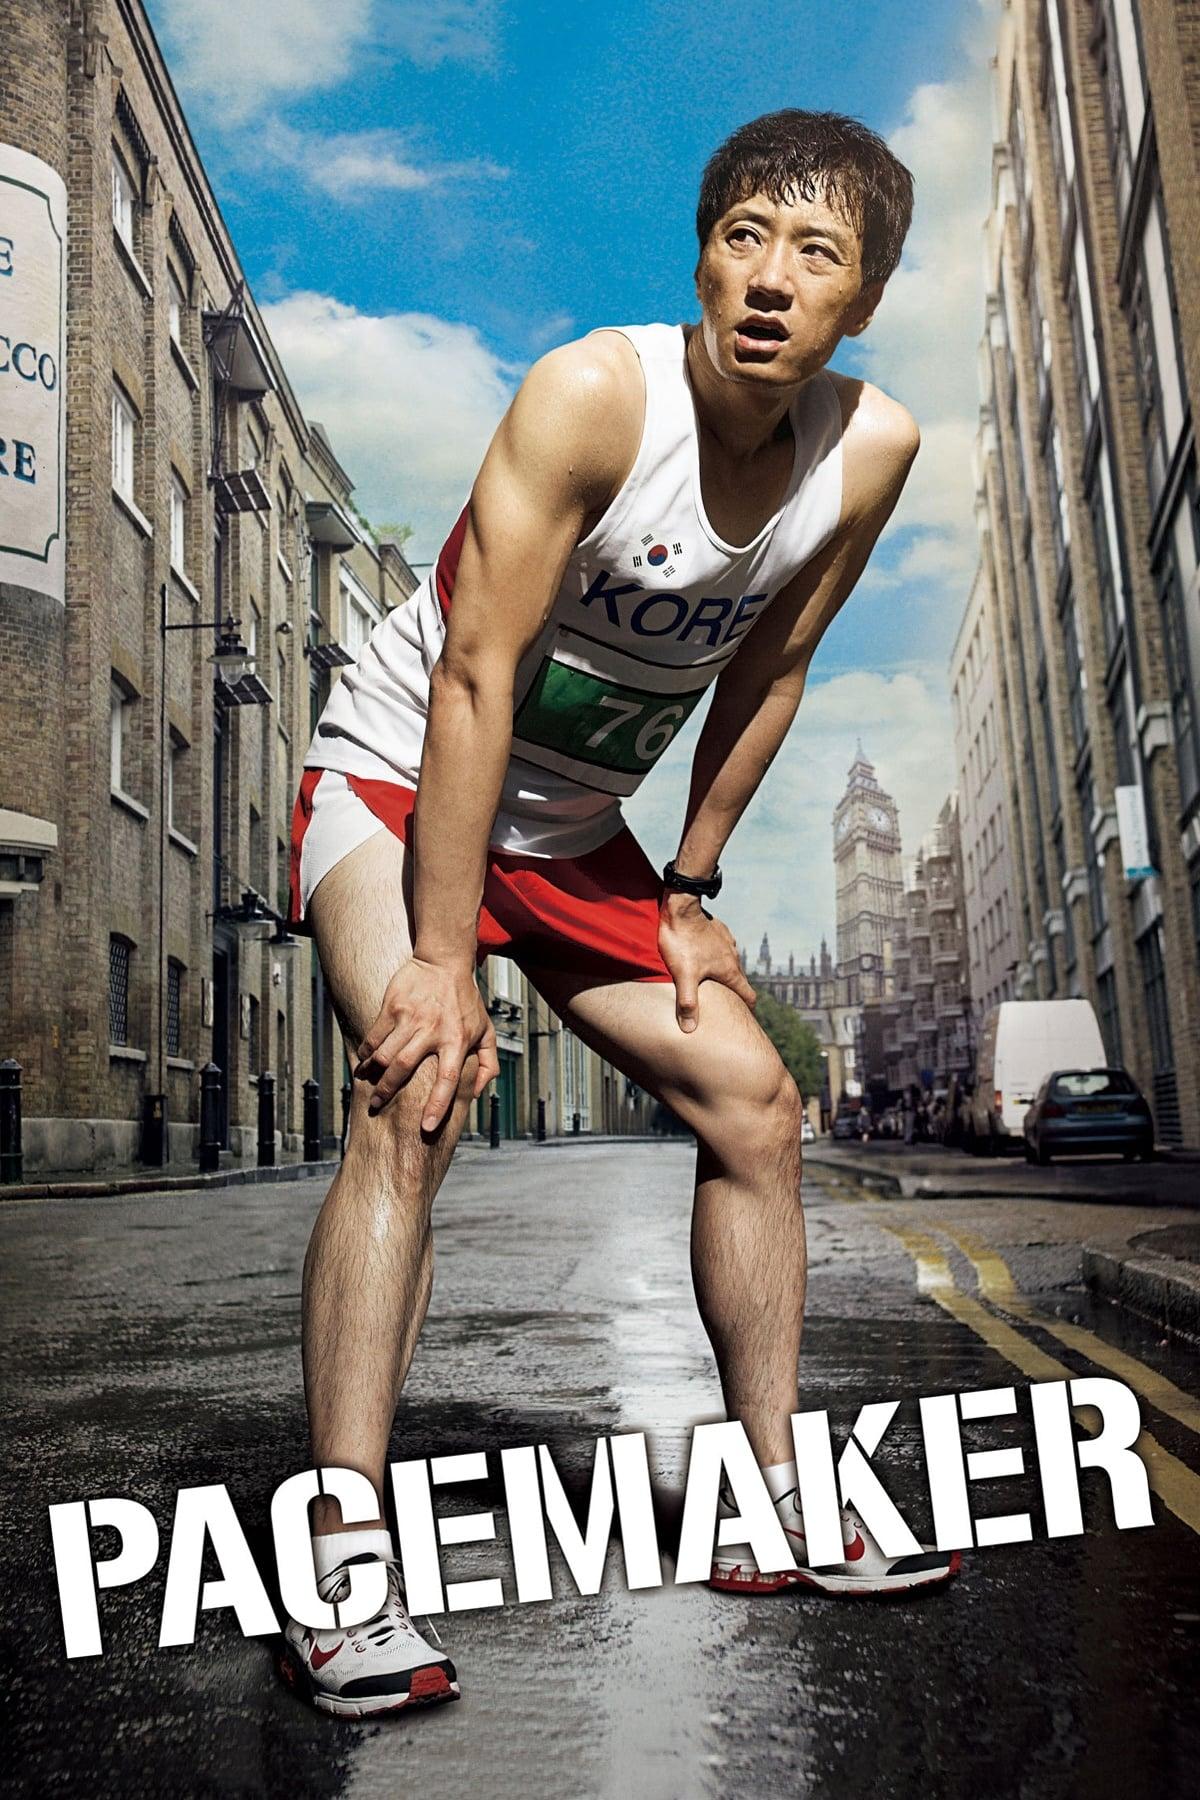 Pacemaker poster